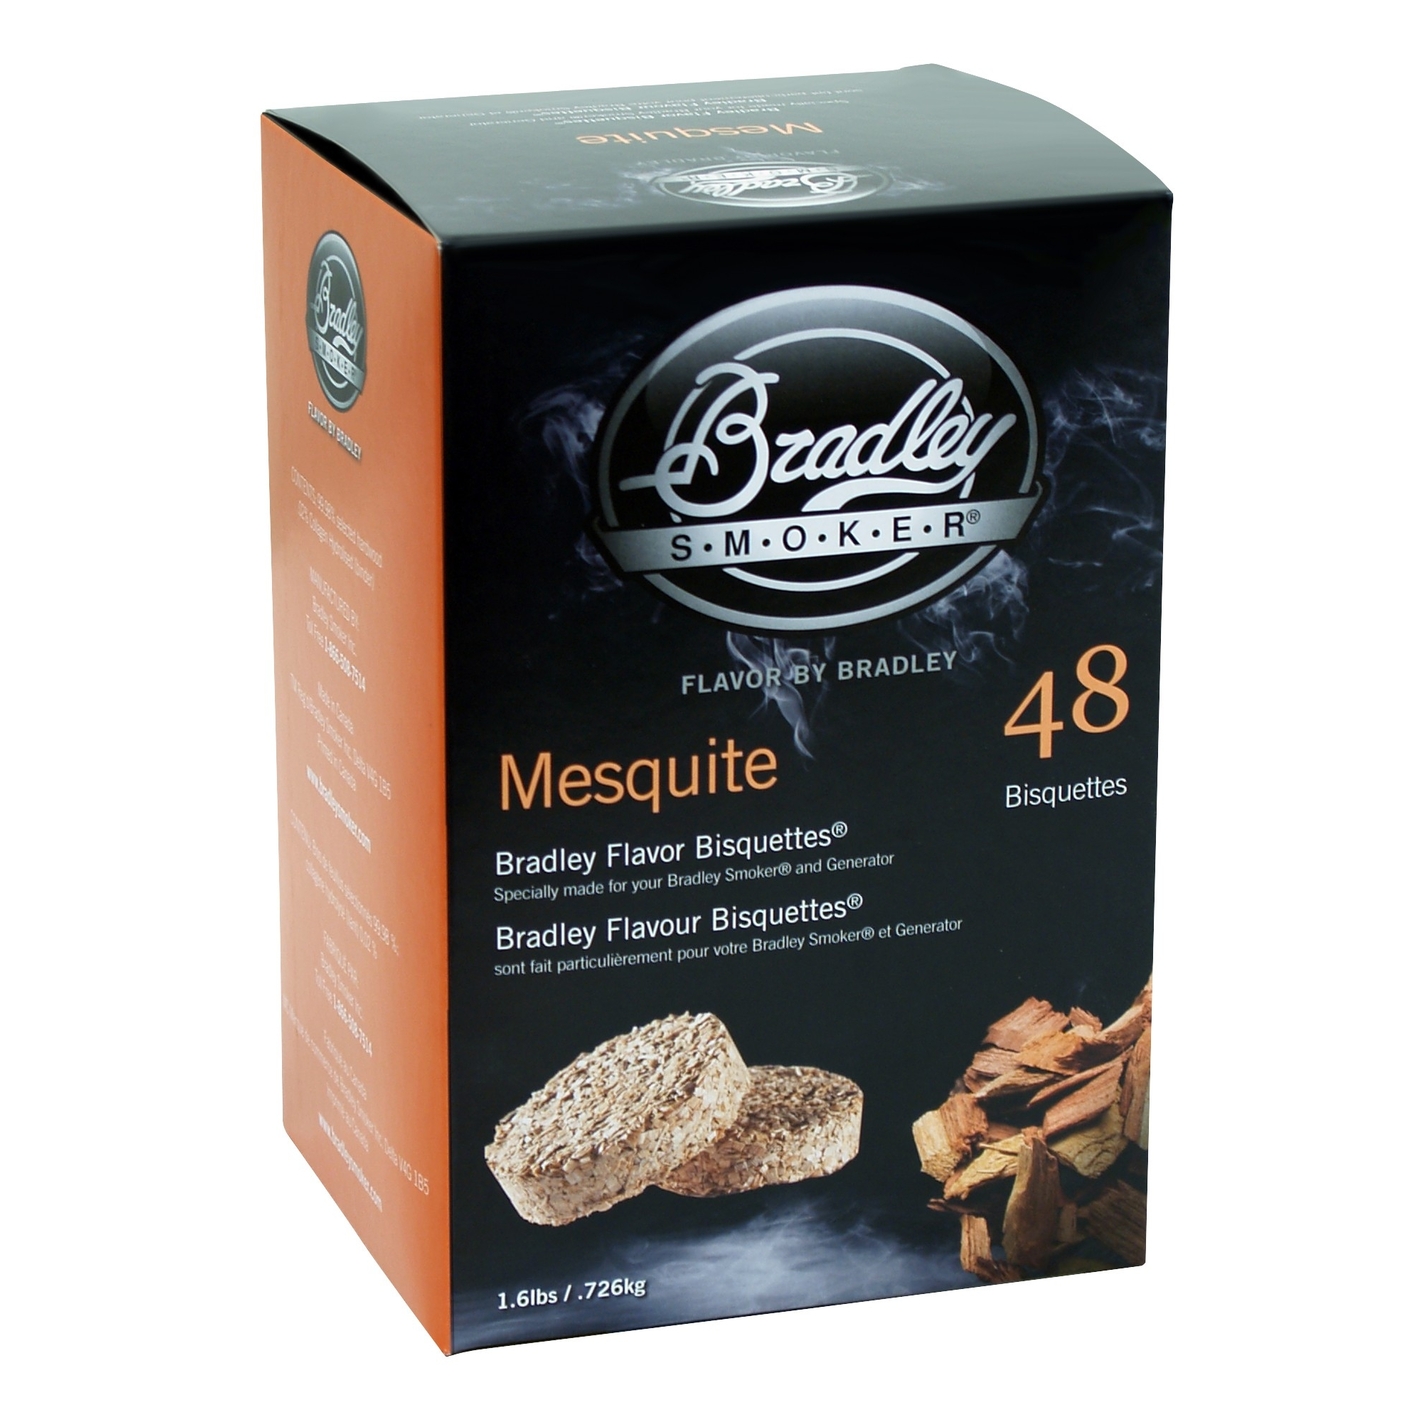 Pack 48 bisquettes mesquite pour fumoir Bradley Smoker